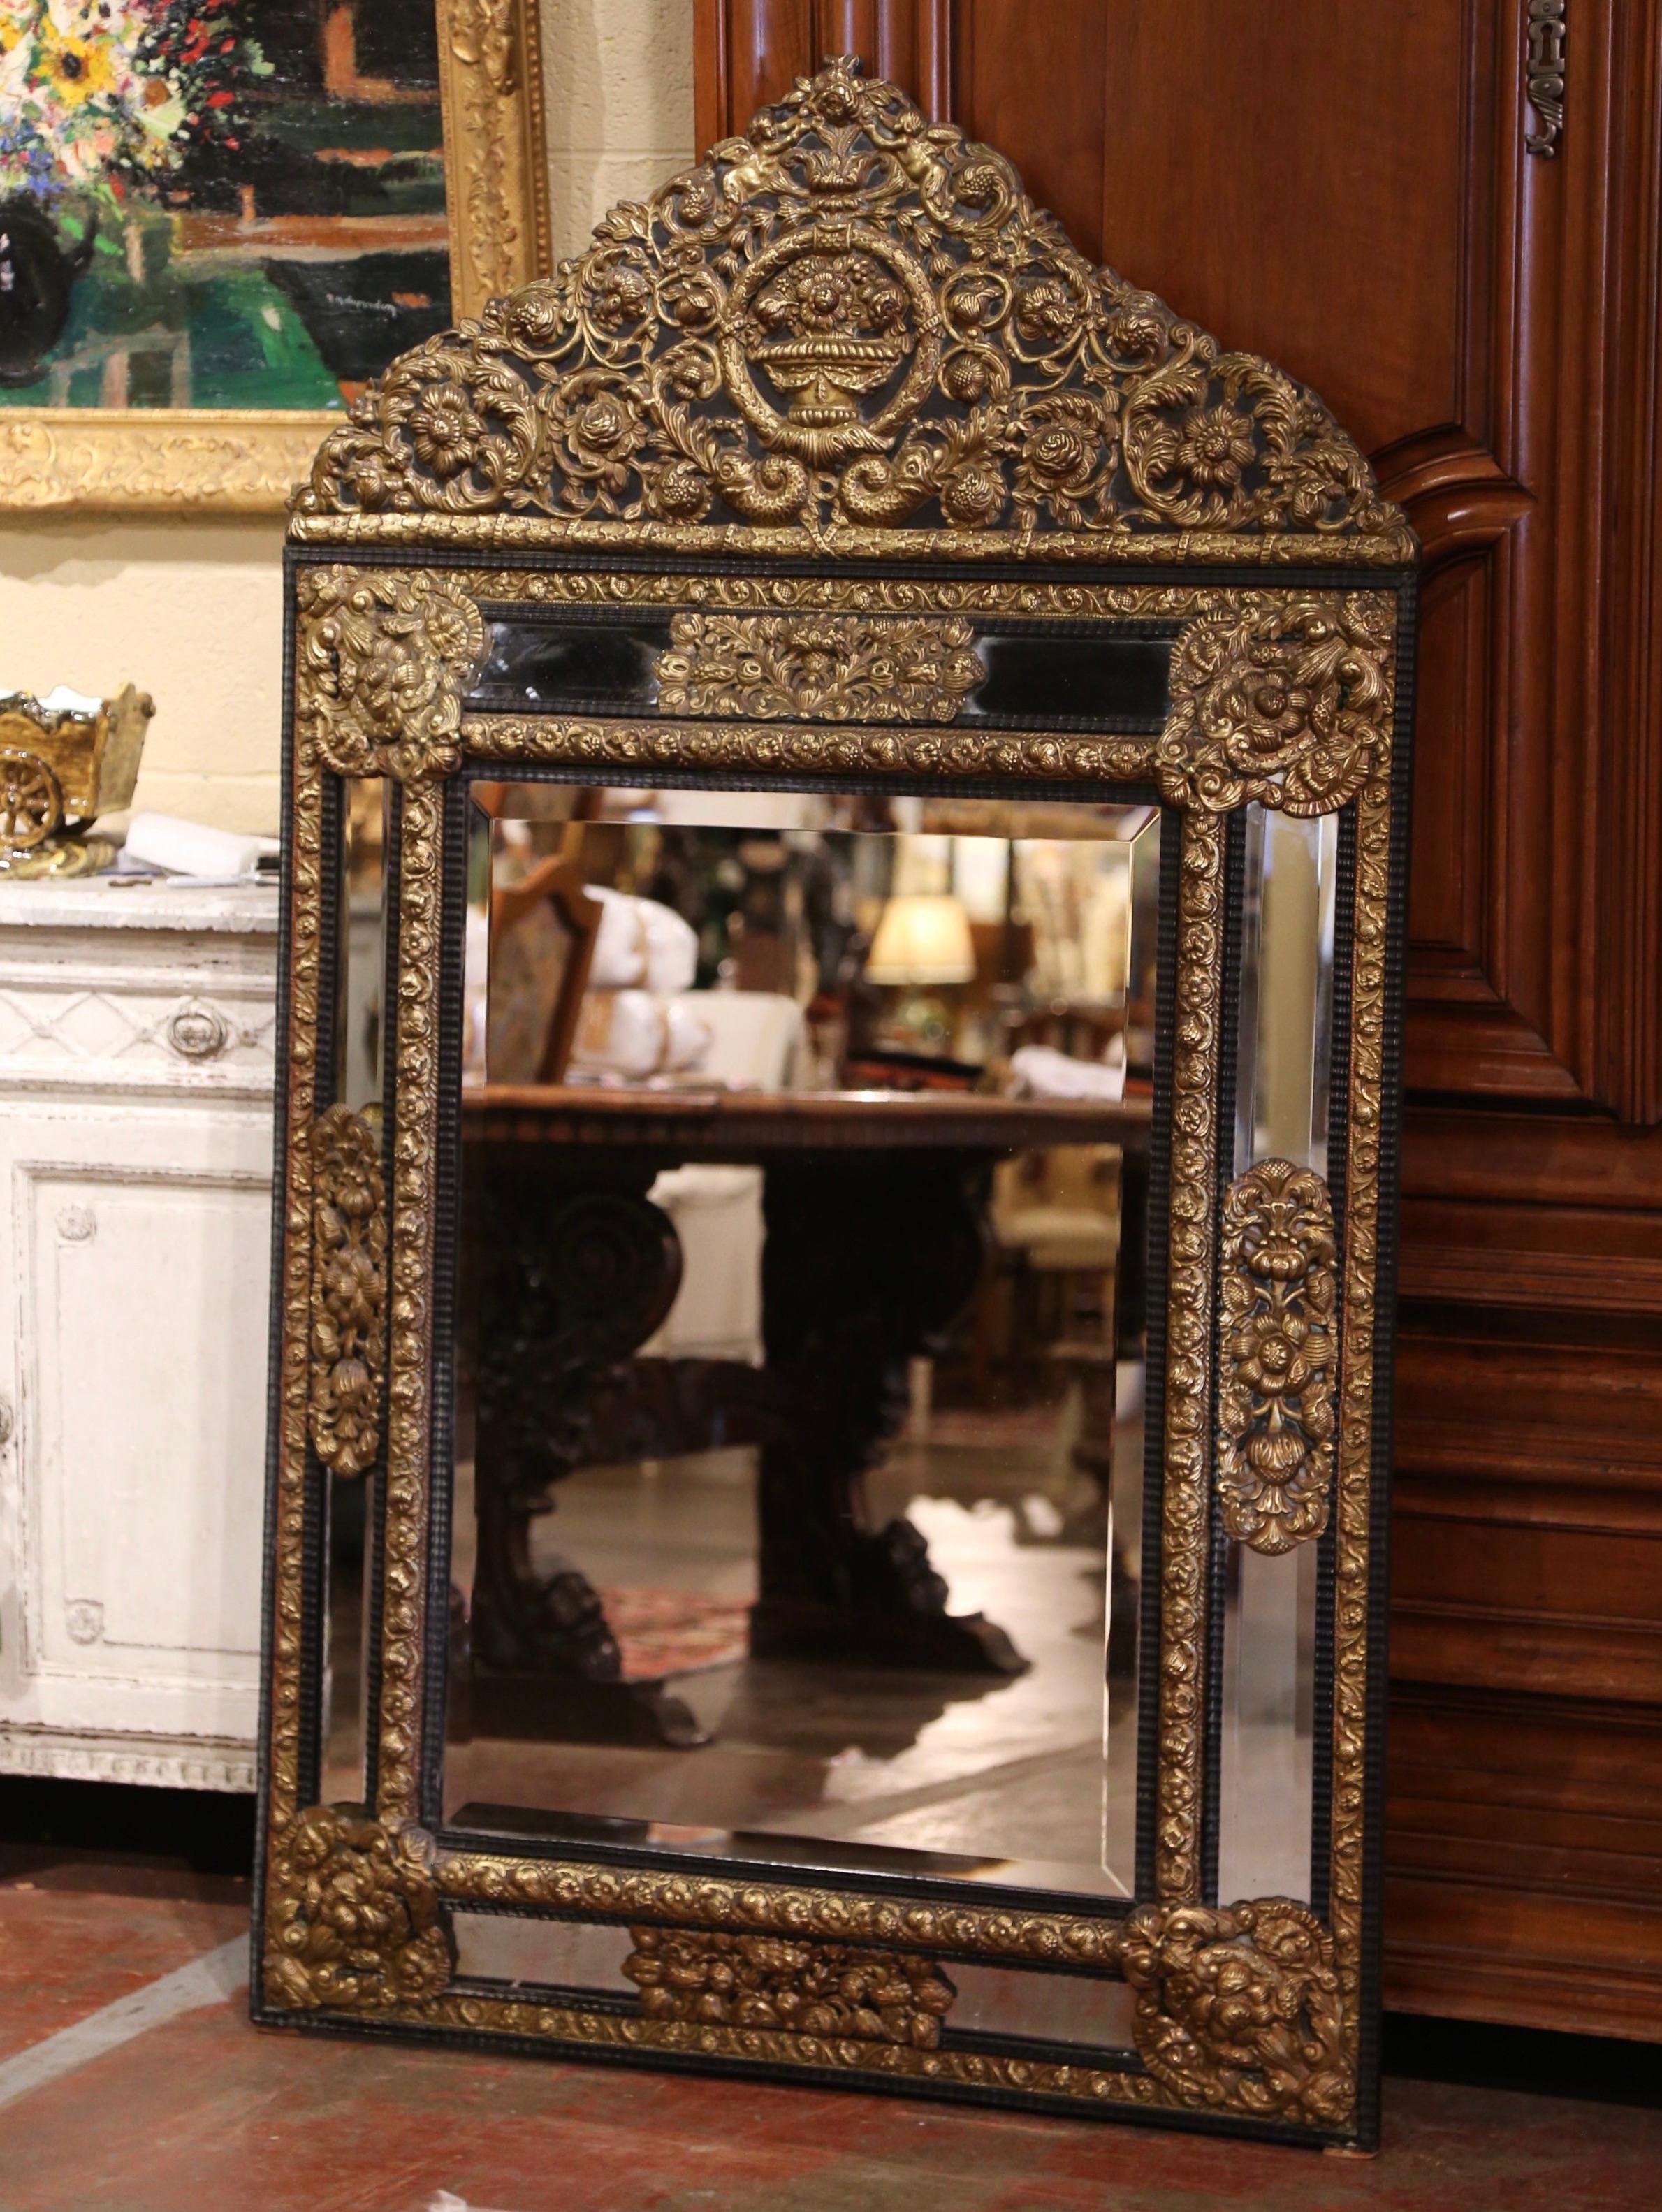 Created in France, circa 1870, the elegant antique wall mirror is decorated with intricate repousse decor including a very large cartouche at the pediment featuring a center floral vase with floral and fruit throughout, and flanked with cherub and